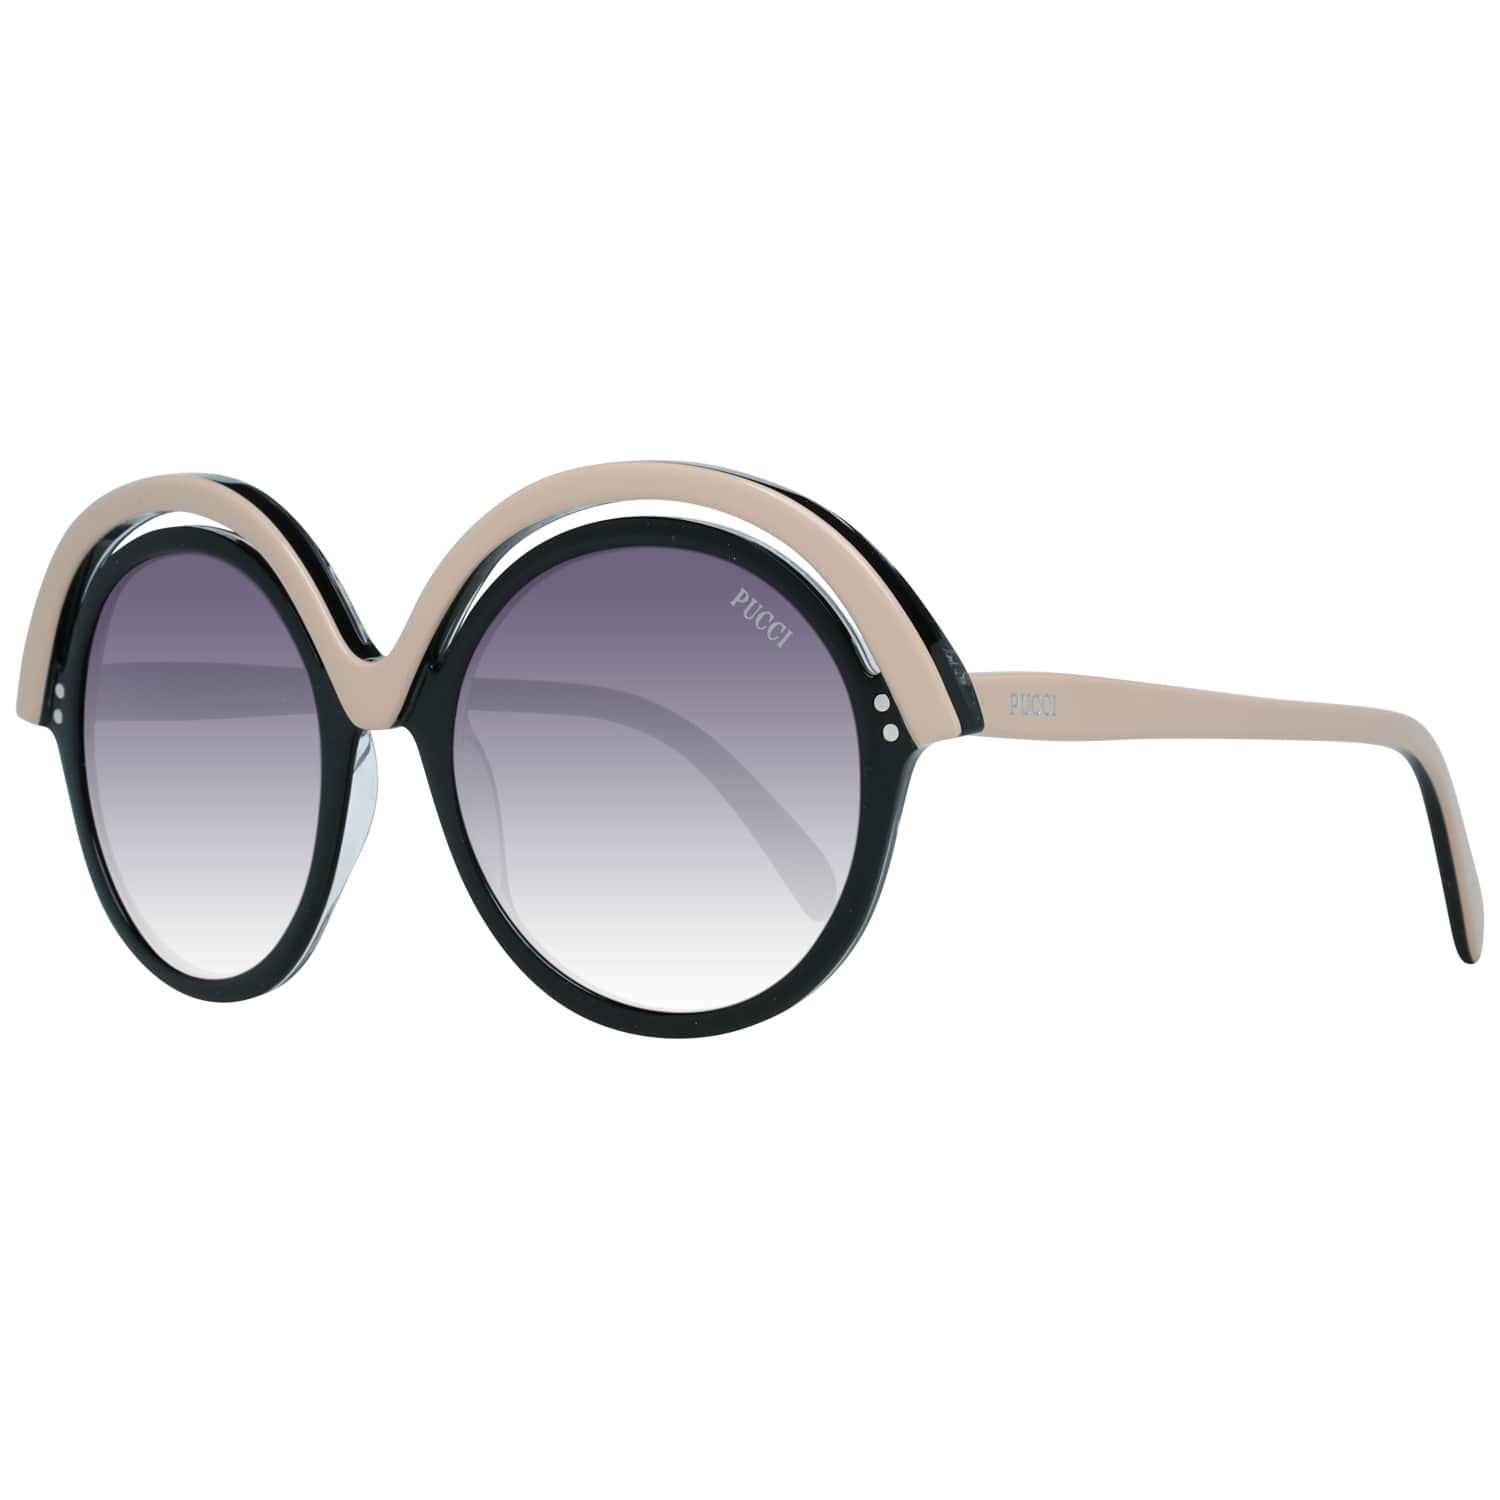 Details

MATERIAL: Acetate

COLOR: Black

MODEL: EP0065 5305B

GENDER: Women

COUNTRY OF MANUFACTURE: Italy

TYPE: Sunglasses

ORIGINAL CASE?: Yes

STYLE: Round

OCCASION: Casual

FEATURES: Lightweight

LENS COLOR: Grey

LENS TECHNOLOGY: